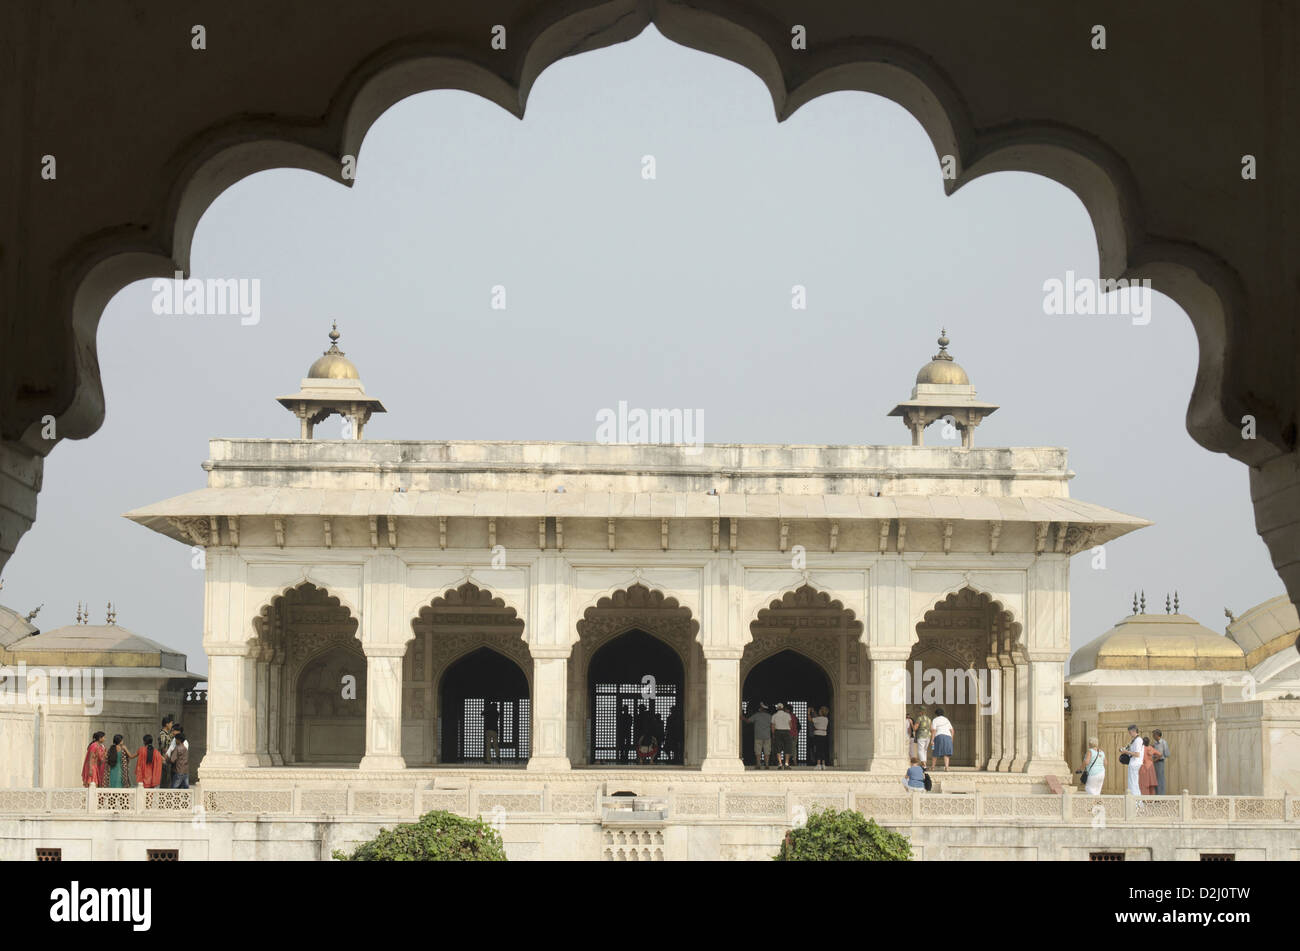 View Of Diwan E Khas Built In White Marble Red Fort Complex